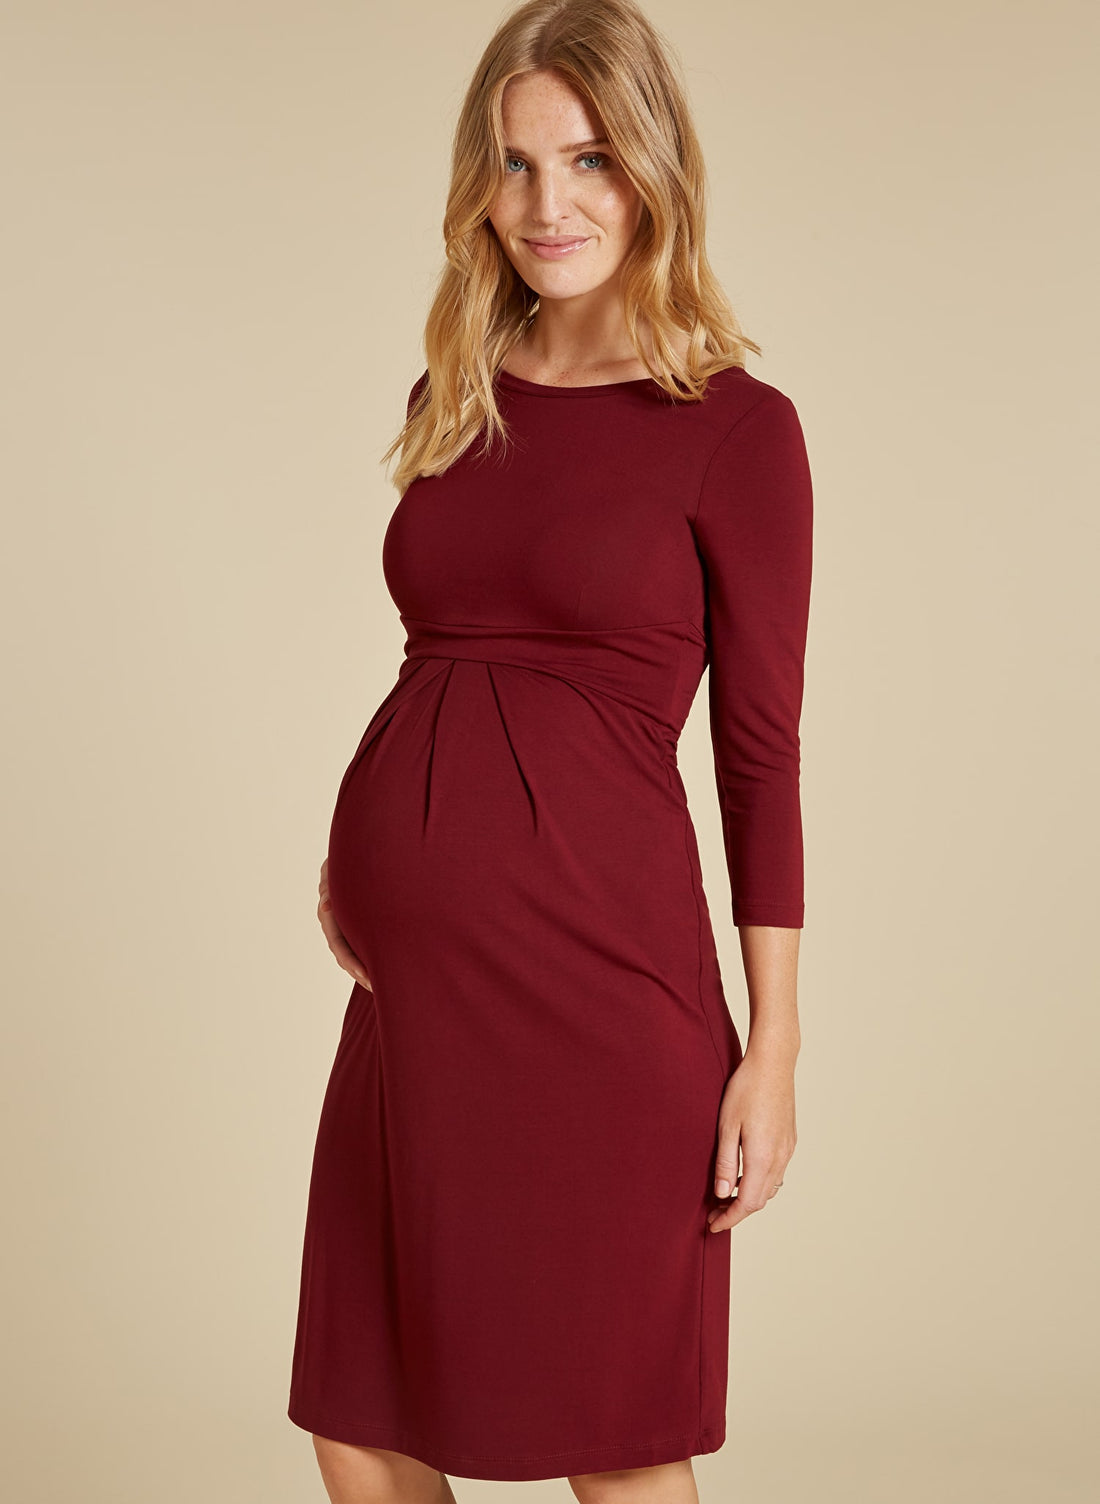 The Blisslets 2018 Gift Guide for Pregnant Mamas